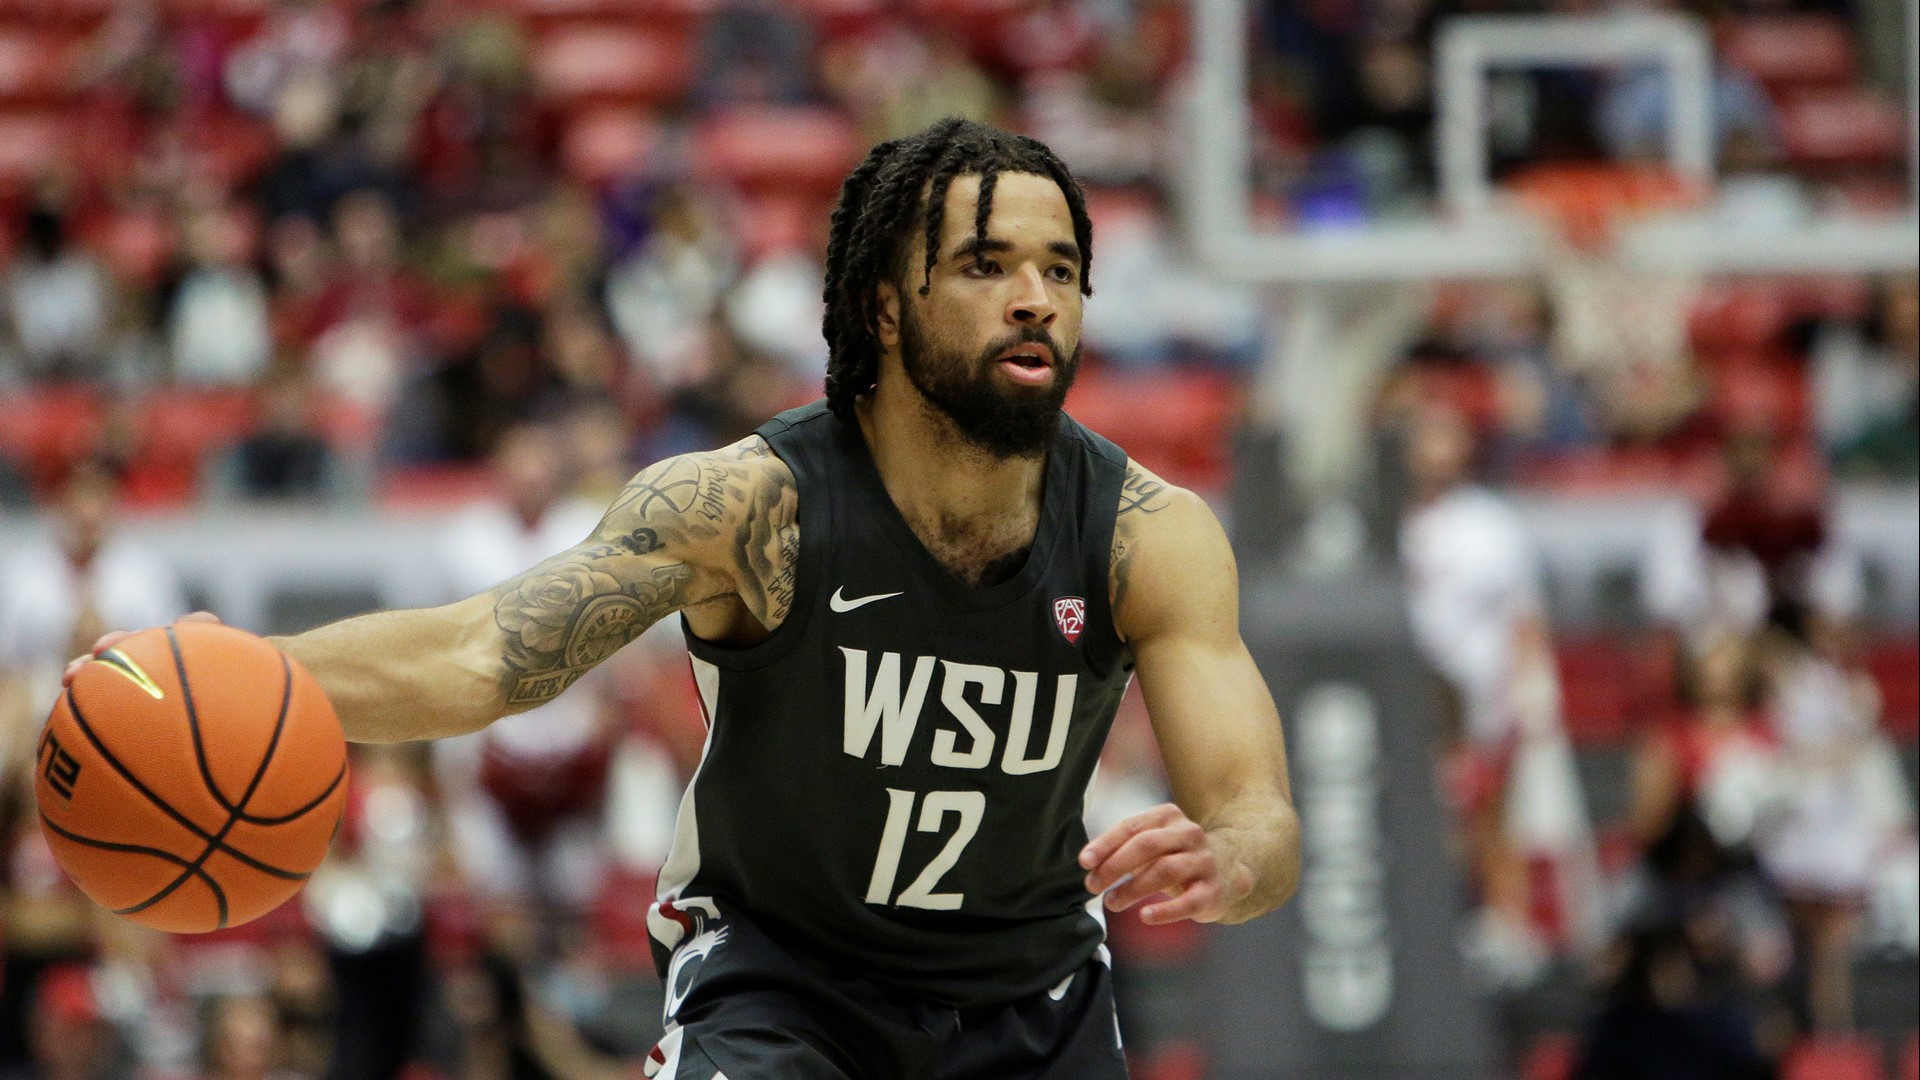 WSU prepares for Texas A&M in the NIT Semifinals